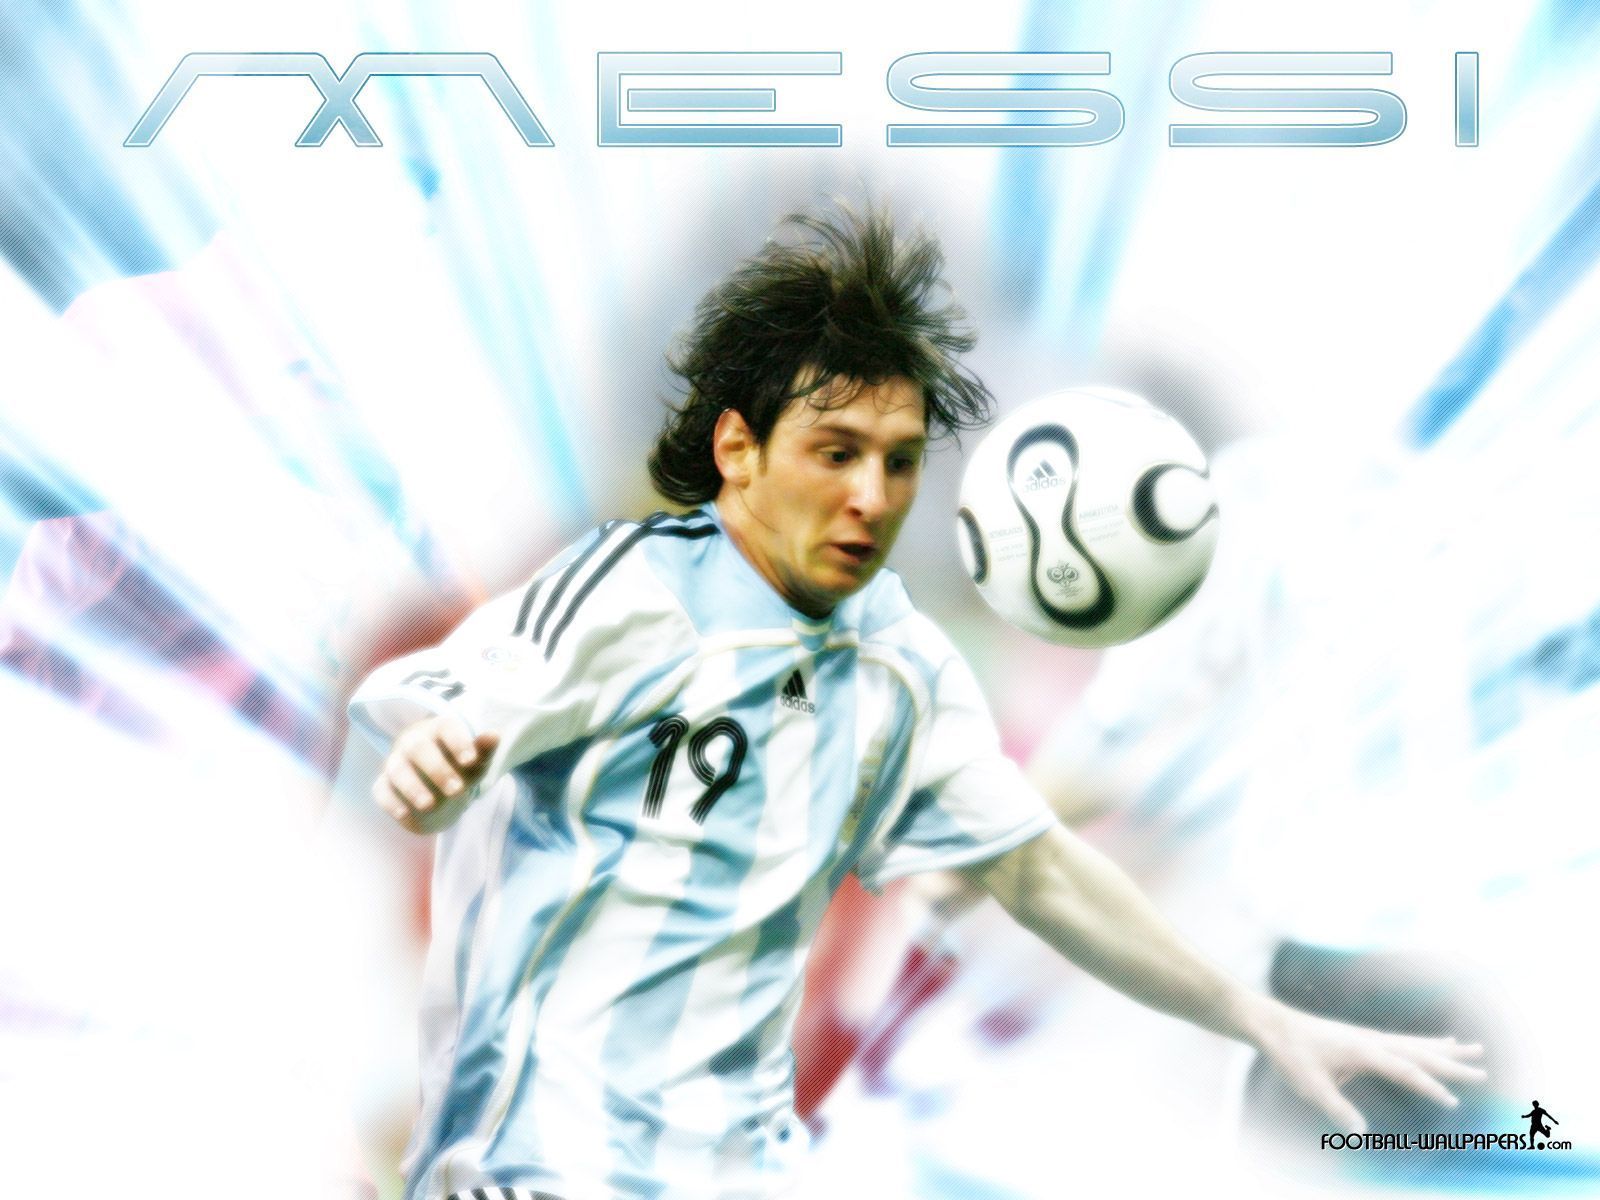 Lionel Messi Wallpaper #1 | Football Wallpapers and Videos